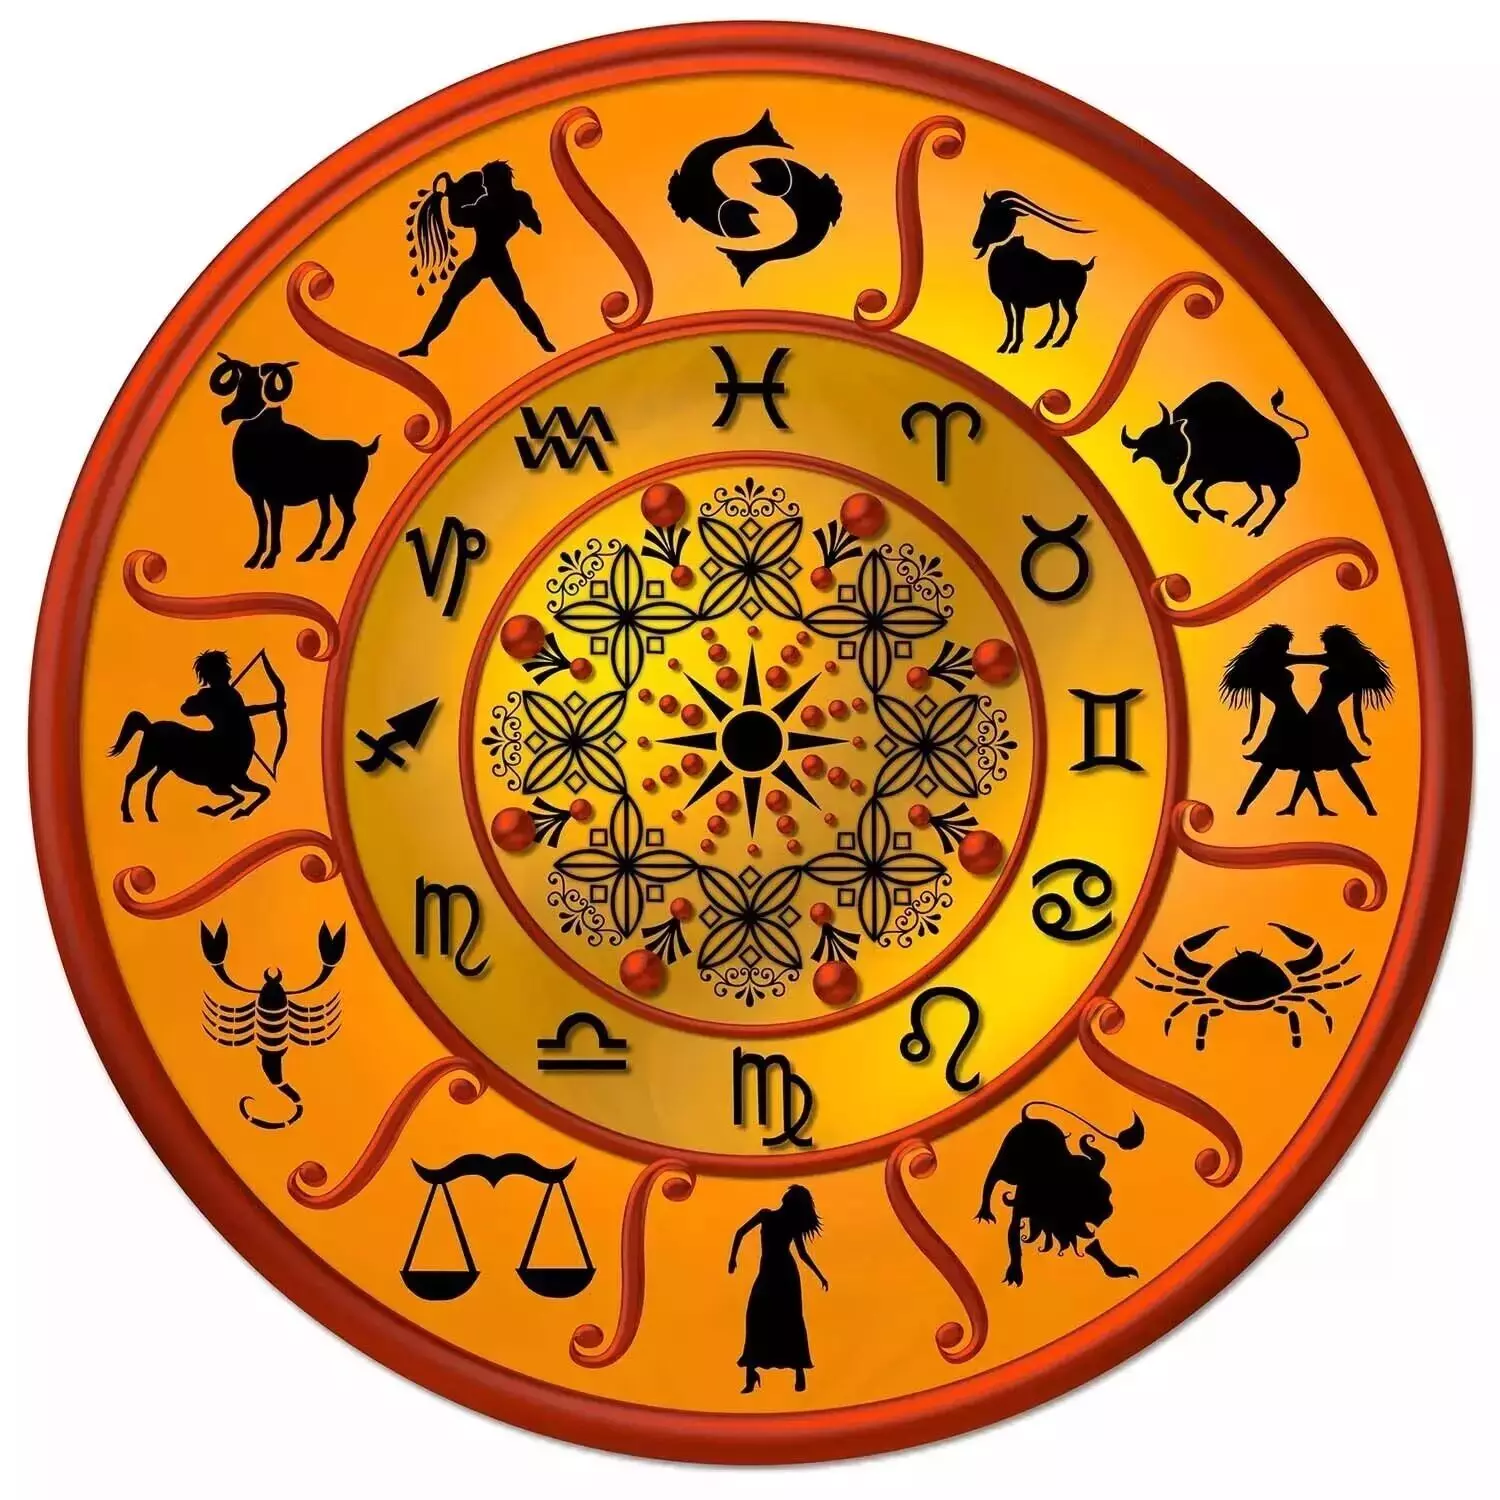 15 October – Know your todays horoscope